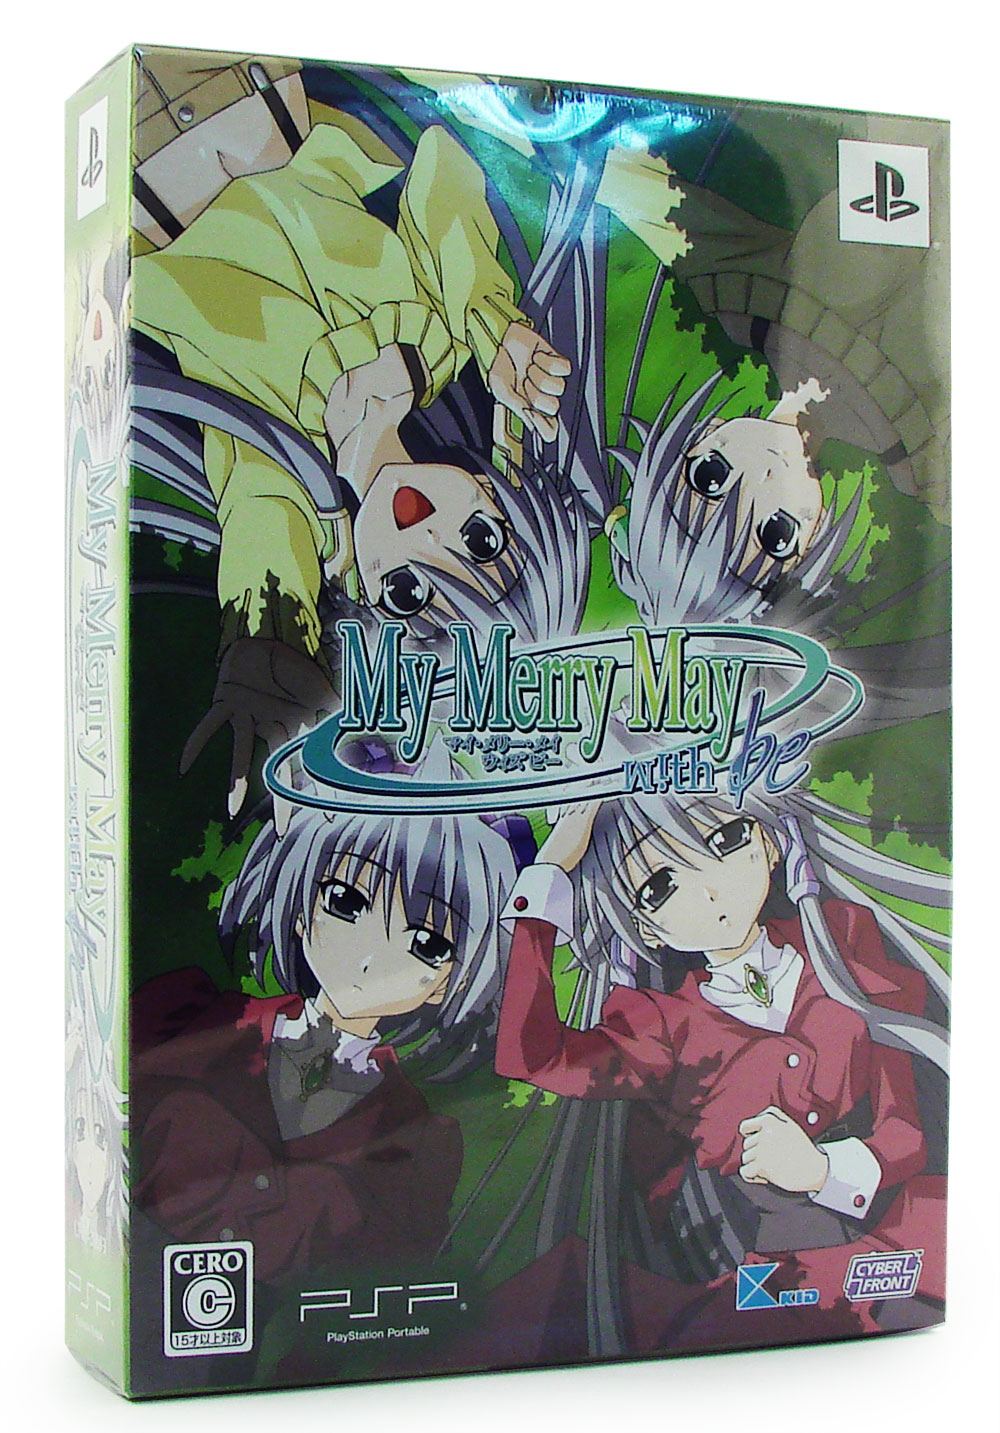 My Merry May with be [Limited Edition] for Sony PSP